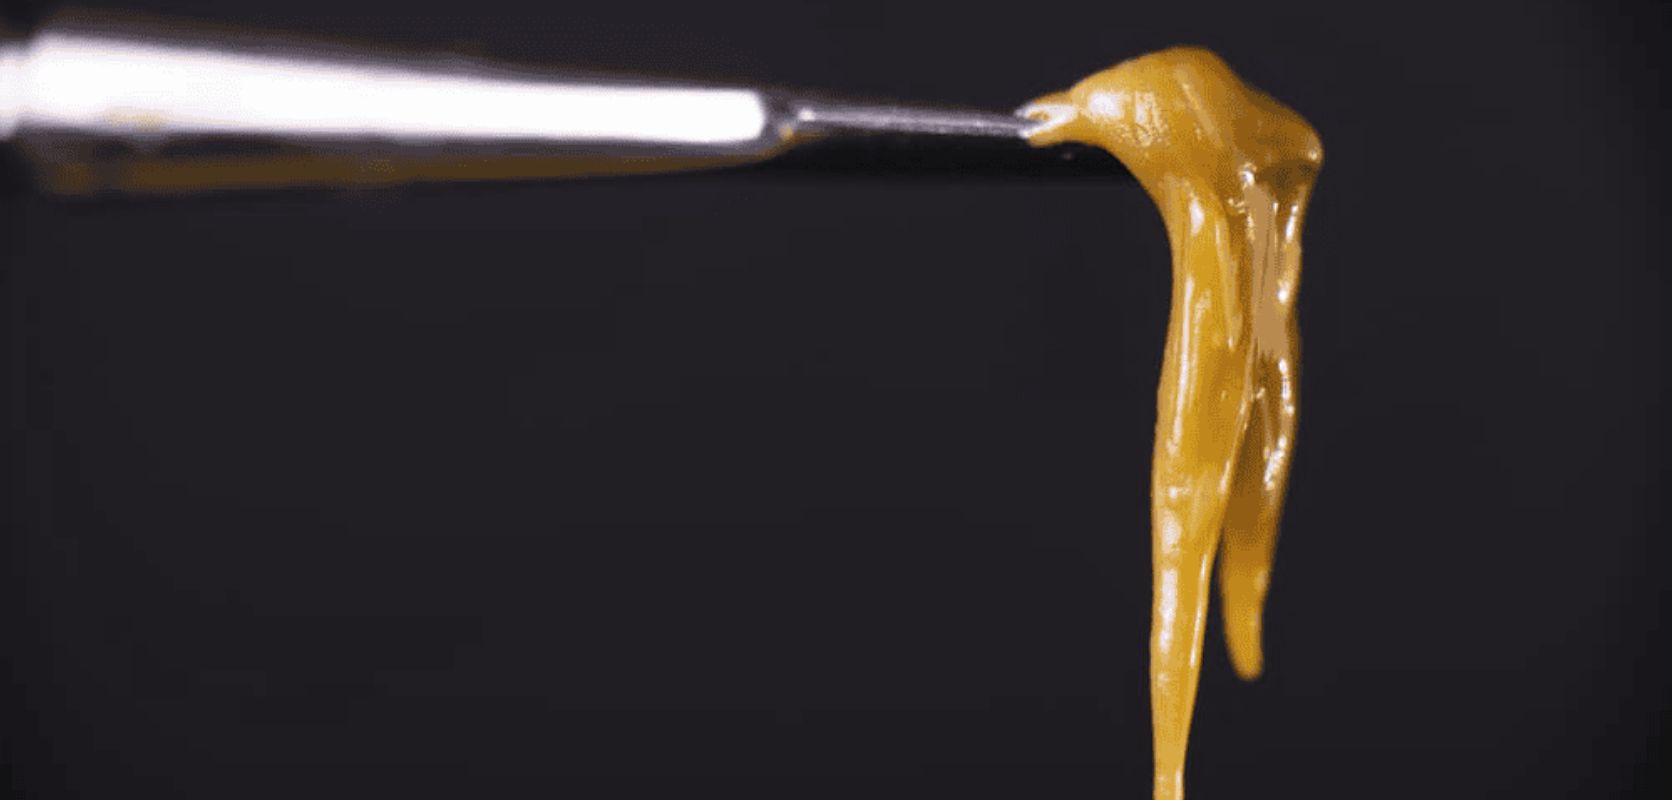 The good thing with rosin is that you can enjoy it in different ways. Cannabis users have options to choose from when it comes to consuming rosin. 